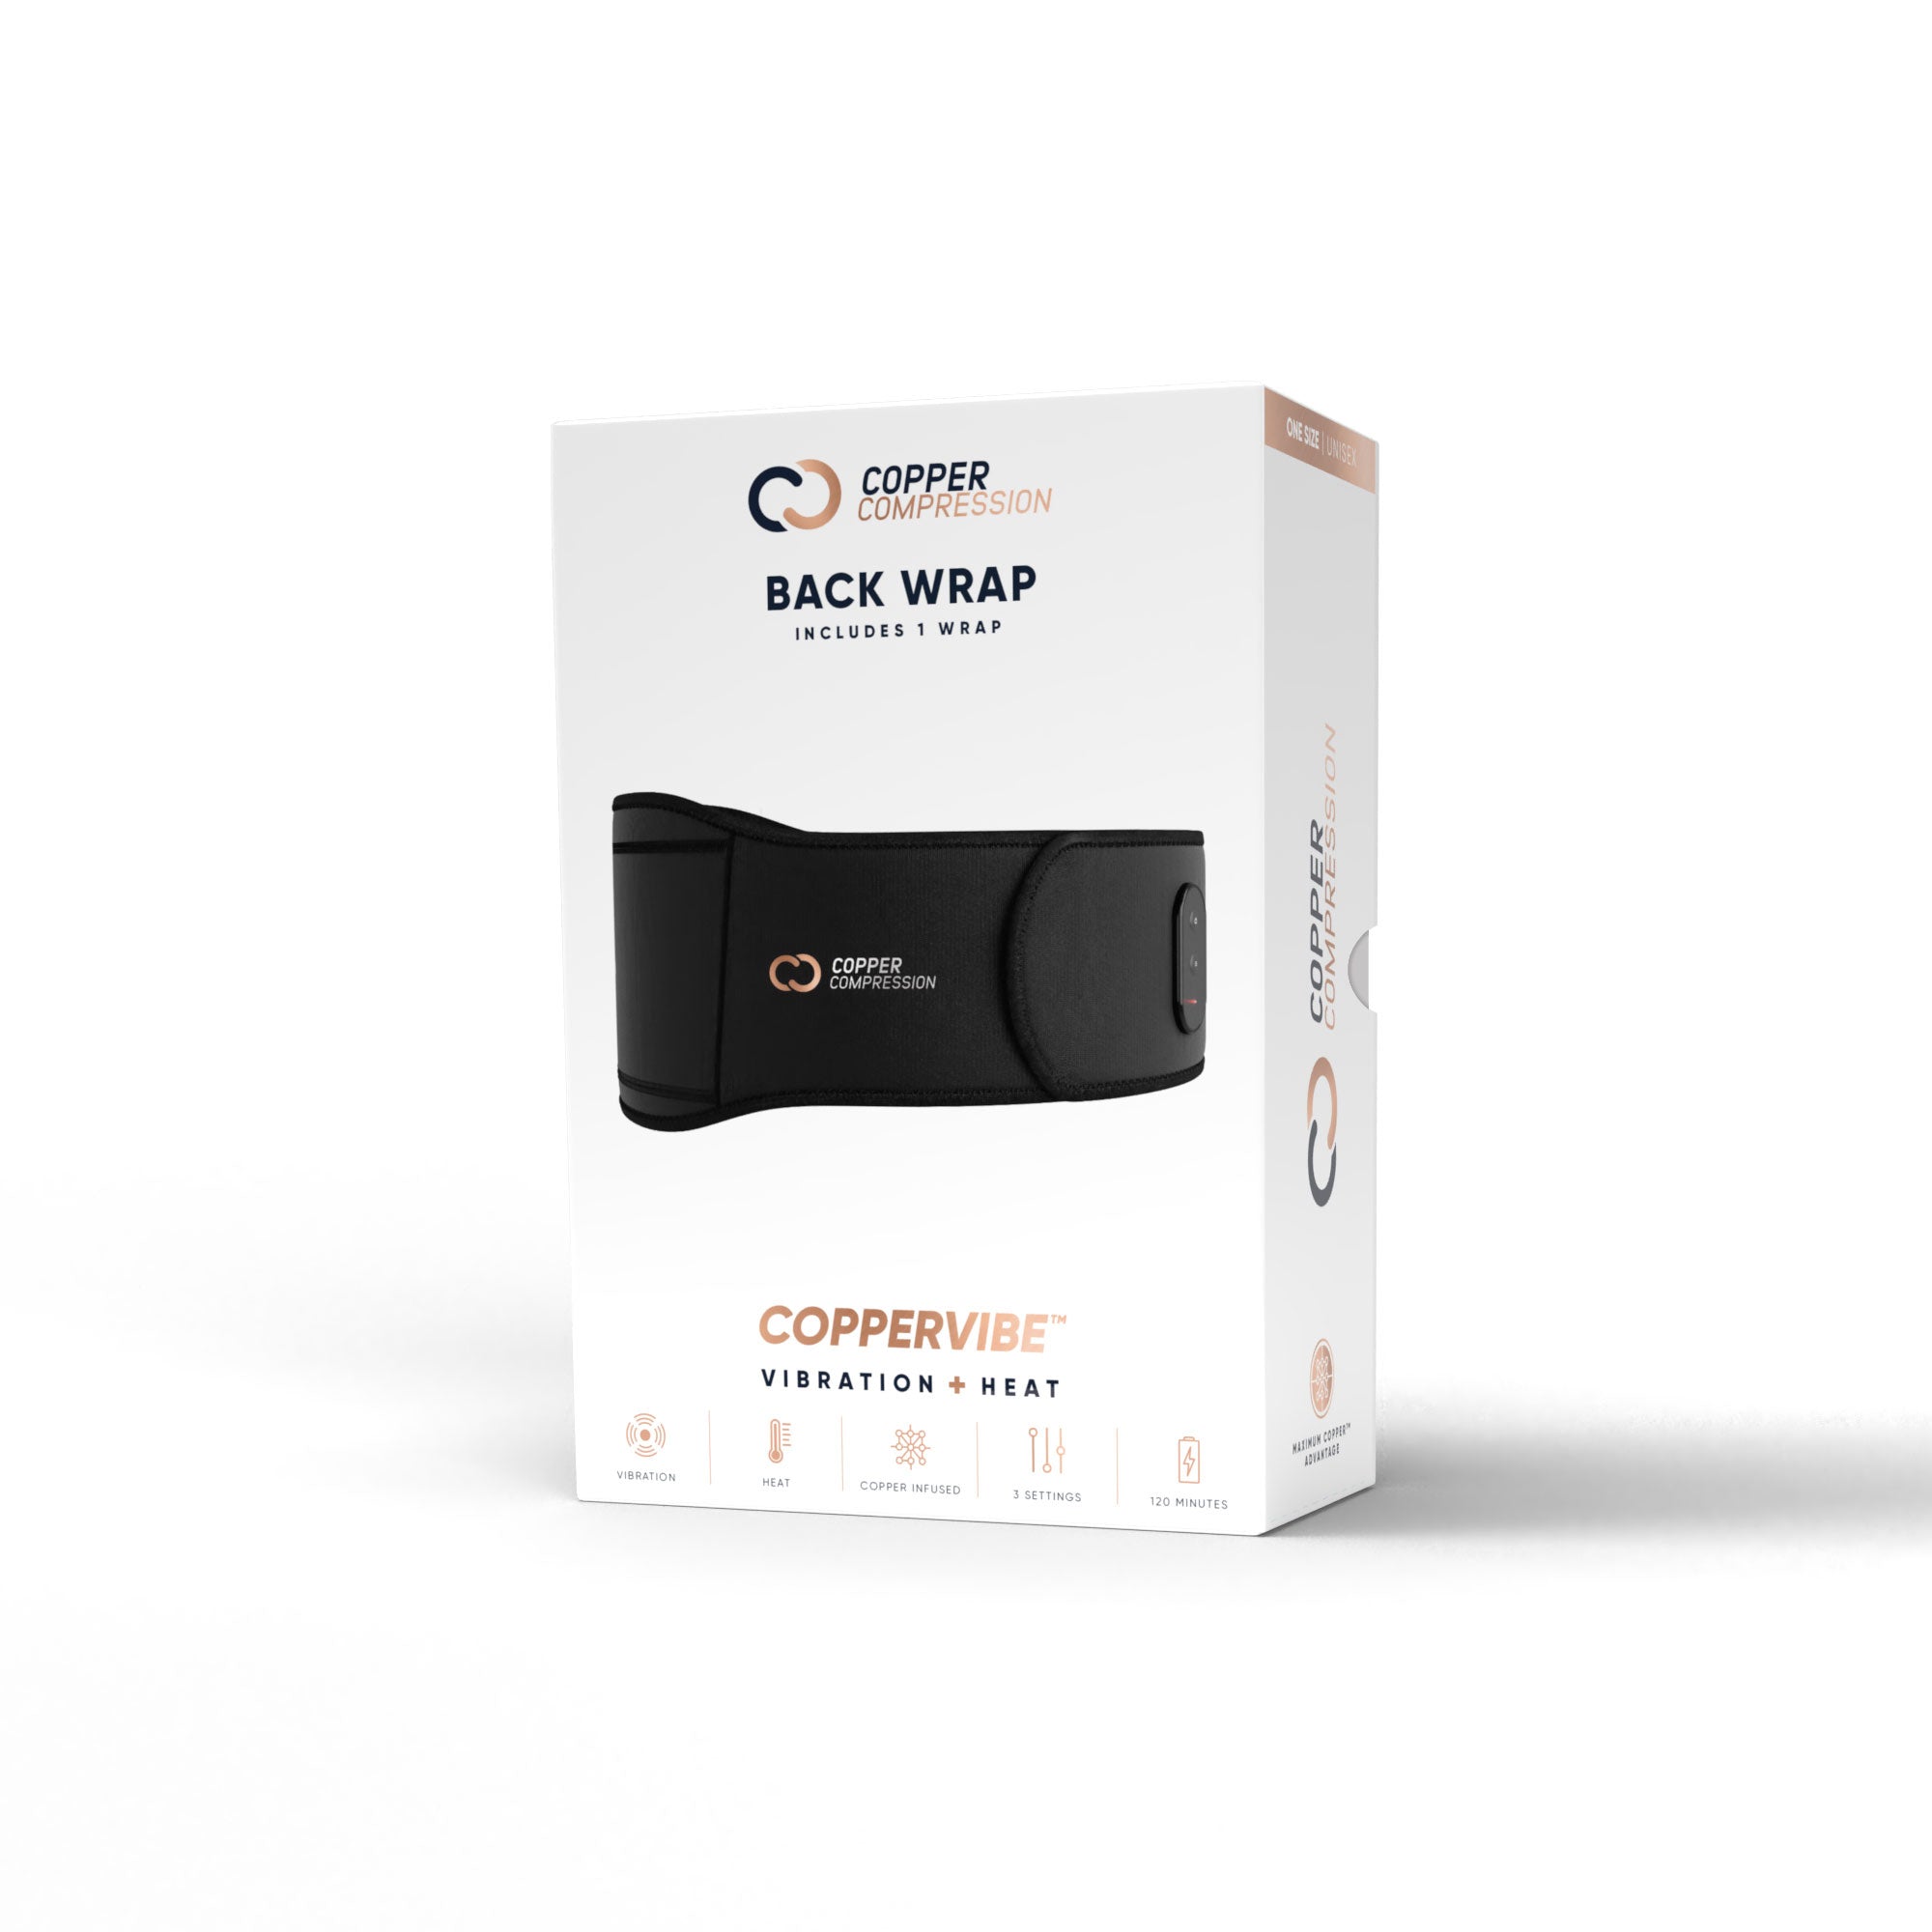 CopperVibe Vibration+Heat Therapy Back Wrap